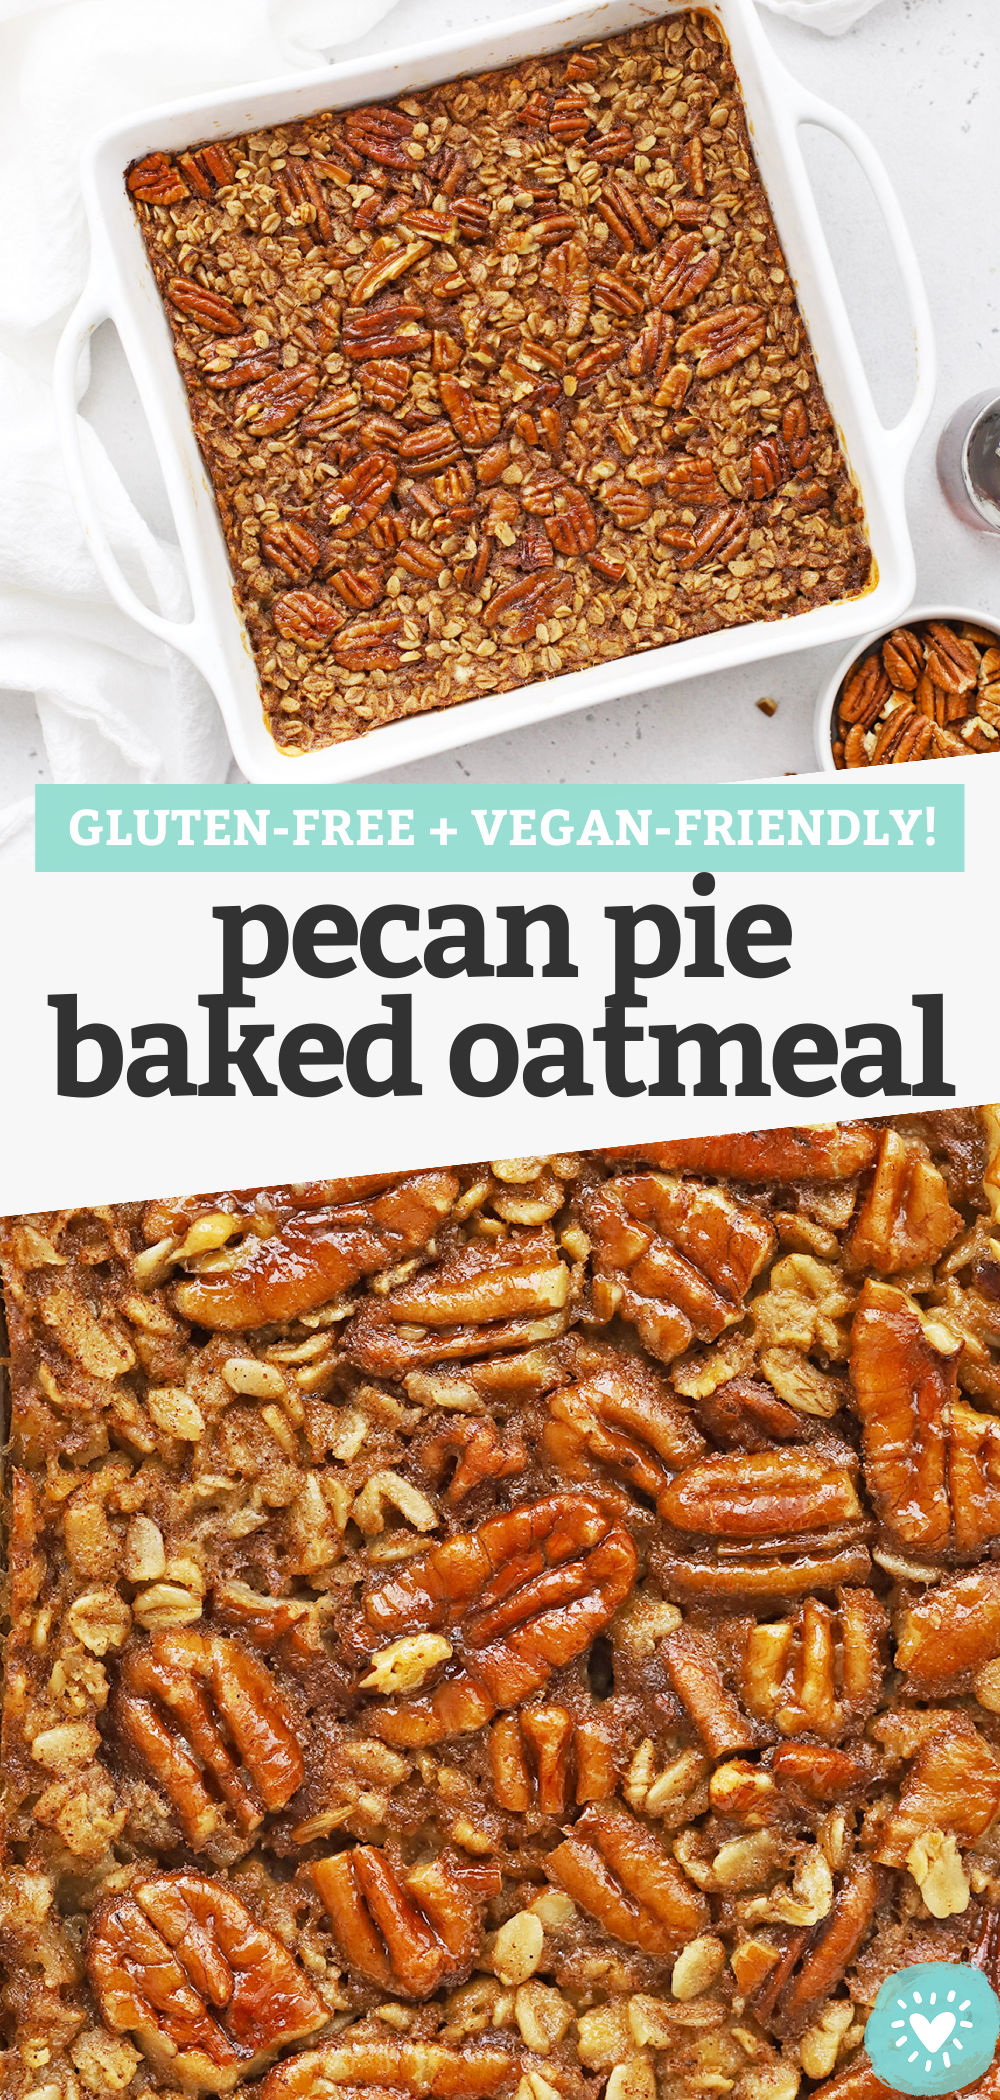 Pecan Pie Baked Oatmeal - This cozy pecan baked oatmeal recipe has notes of cinnamon, vanilla, maple, and pecans to make a delicious meal-prep breakfast your whole family will fall in love with. (Gluten-Free, Vegan-Friendly) // cinnamon pecan oatmeal // baked oatmeal recipe // meal prep breakfast // fall recipe // vegan breakfast // gluten-free breakfast #glutenfree #vegan #bakedoatmeal #oatmeal